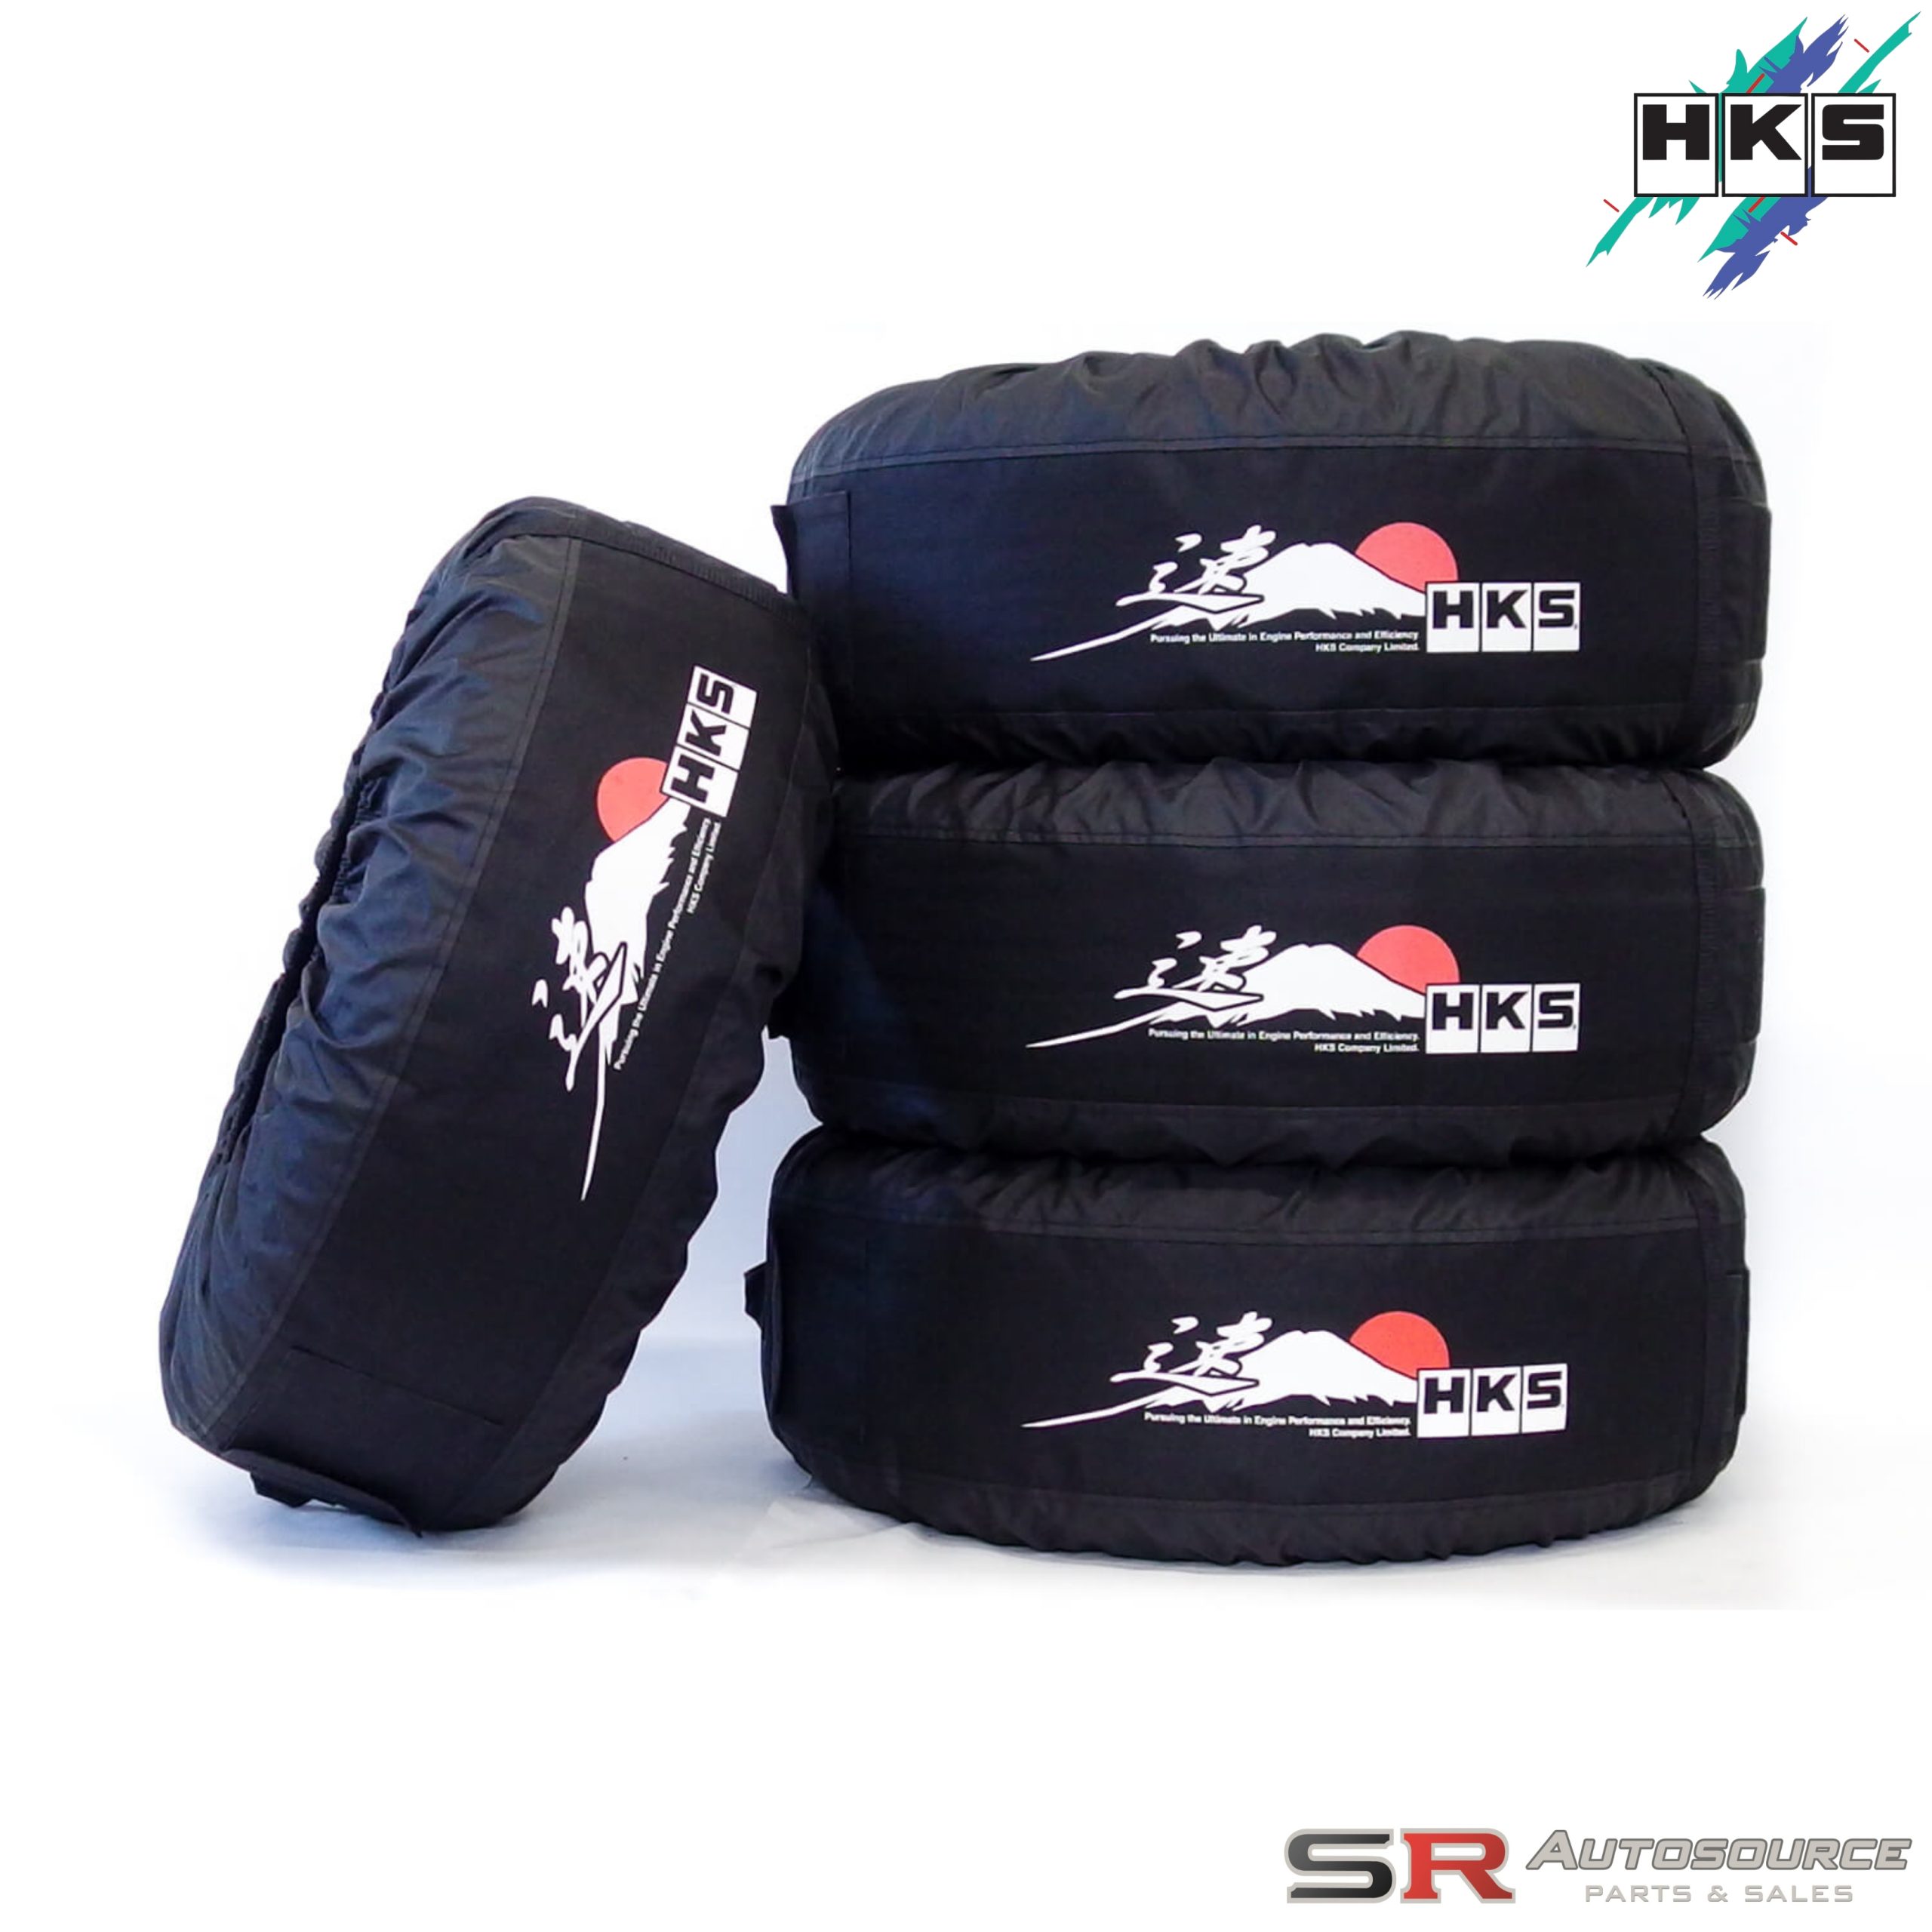 HKS Japan Tyre Cover Limited Edition 4 Piece Set – Storage Bags (Tyre Totes)